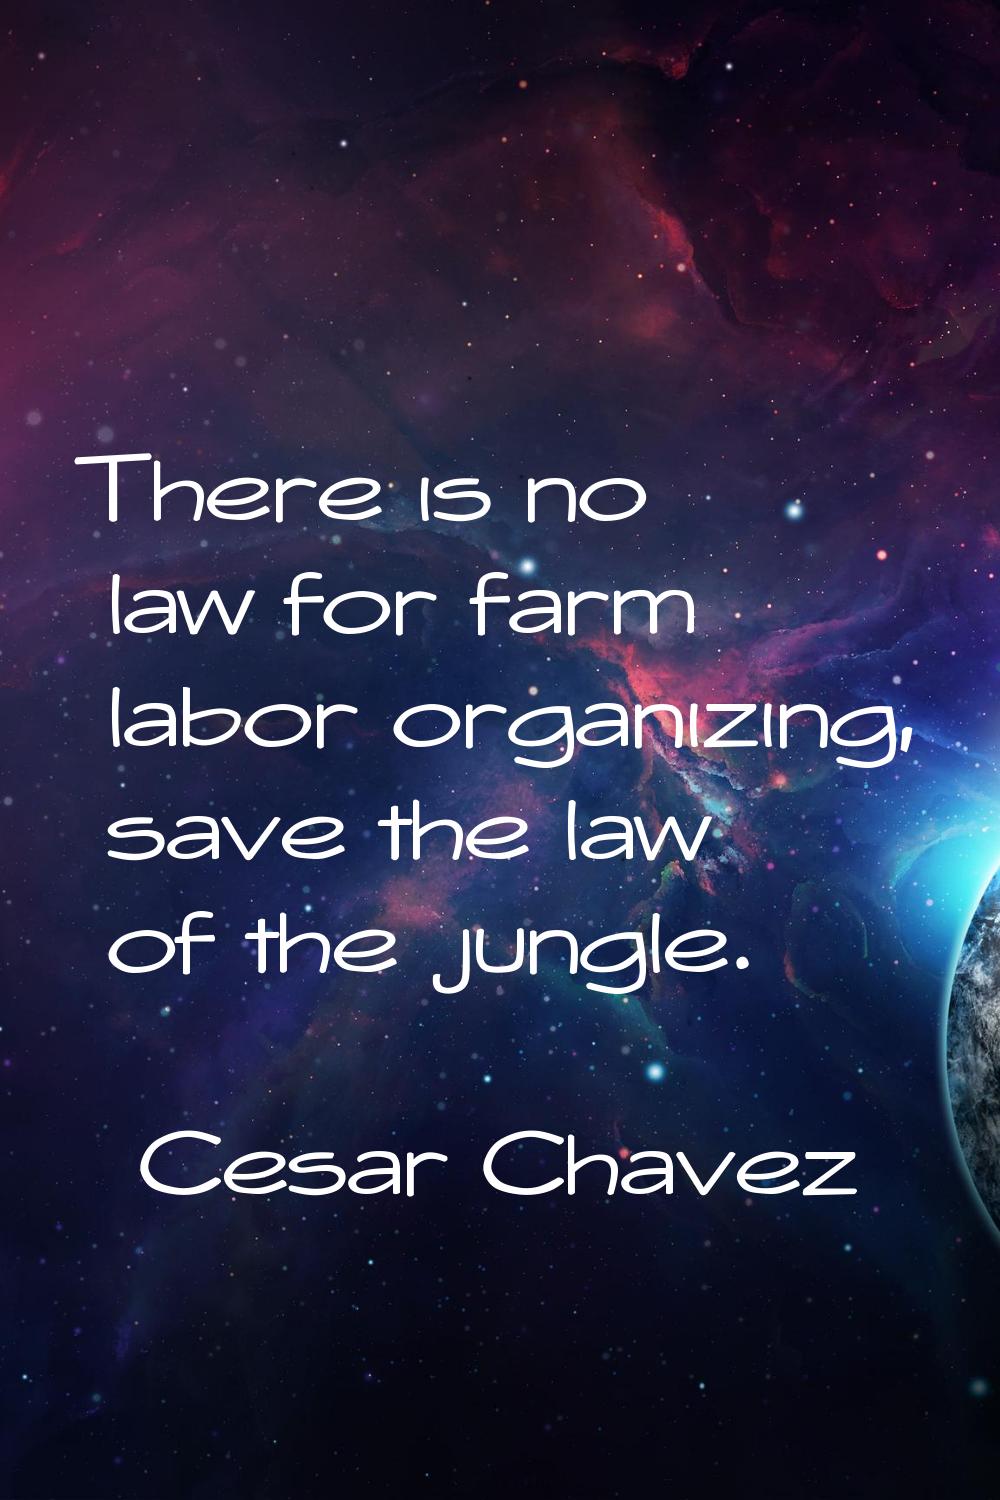 There is no law for farm labor organizing, save the law of the jungle.